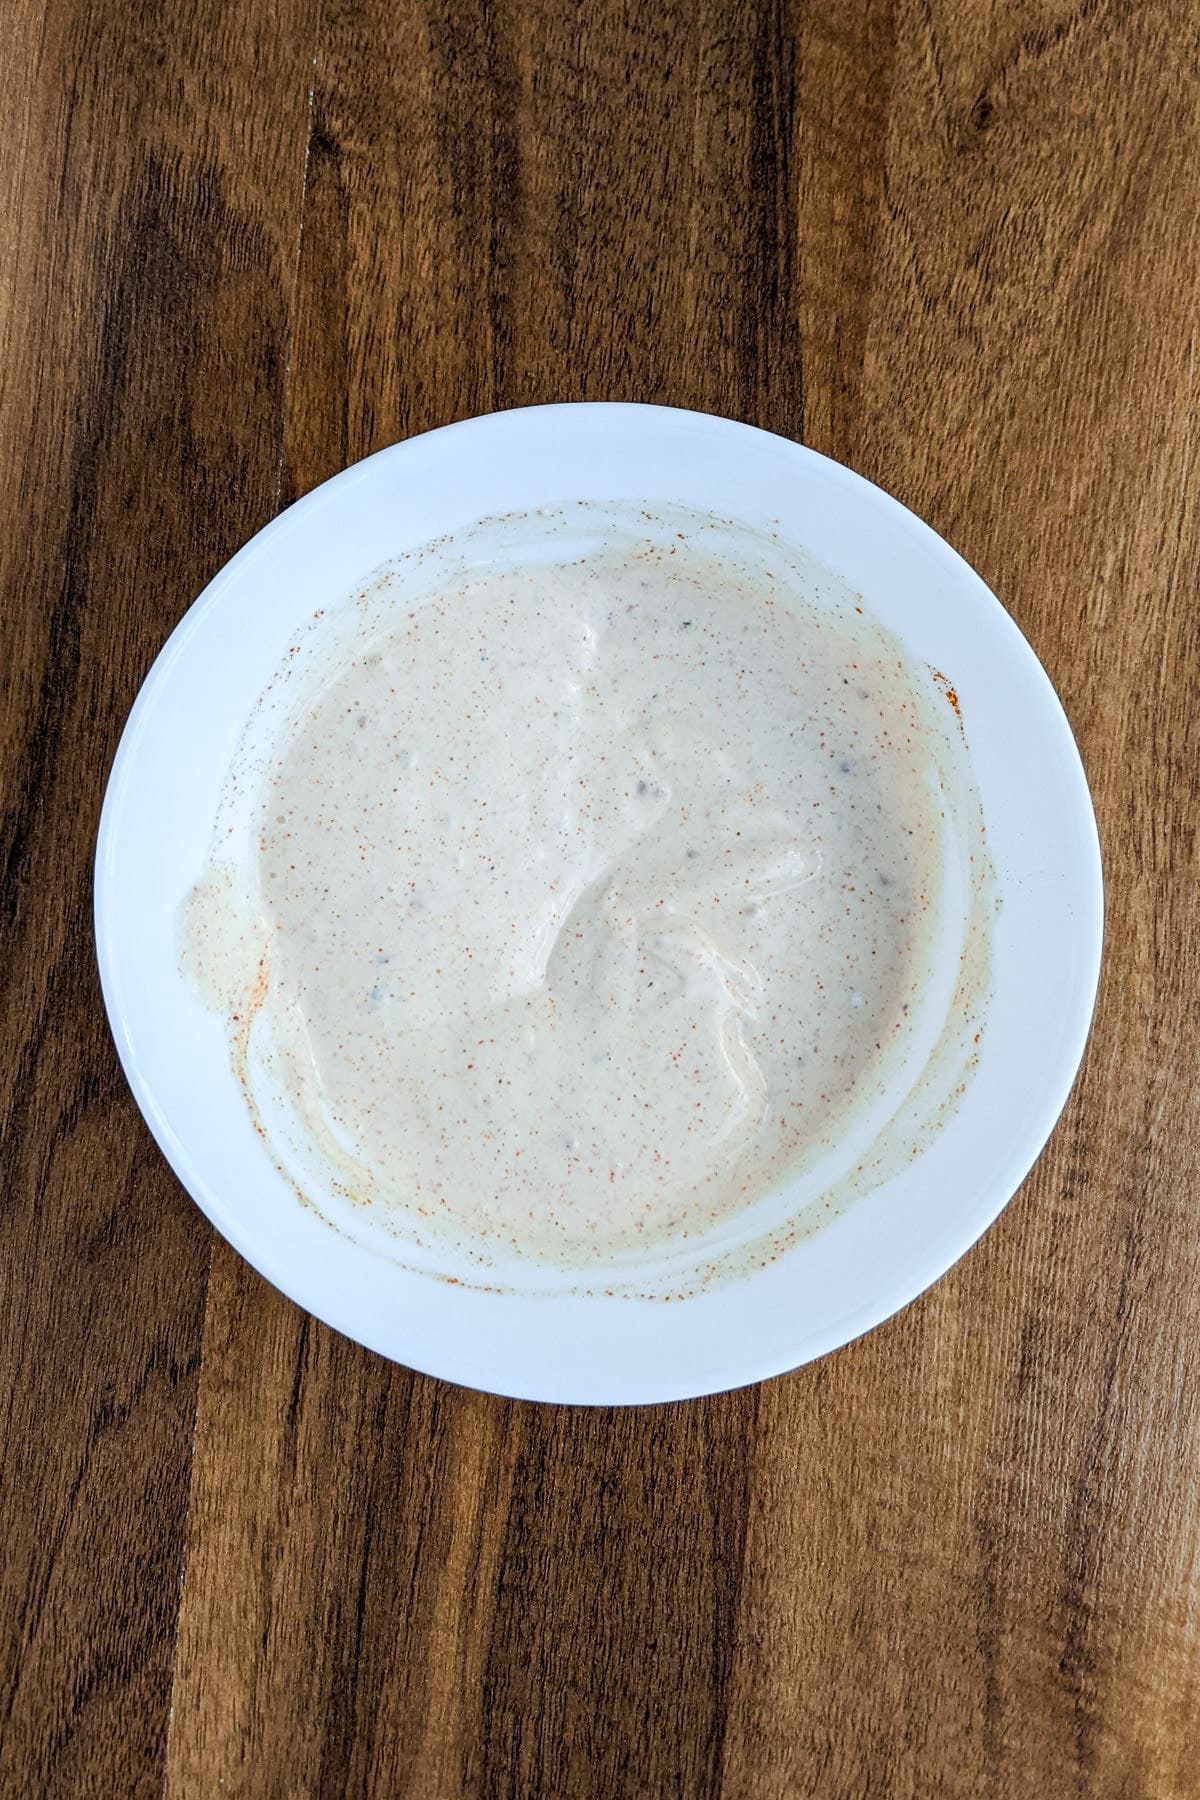 Top view of a white plate with White BBQ Alabama Sauce.